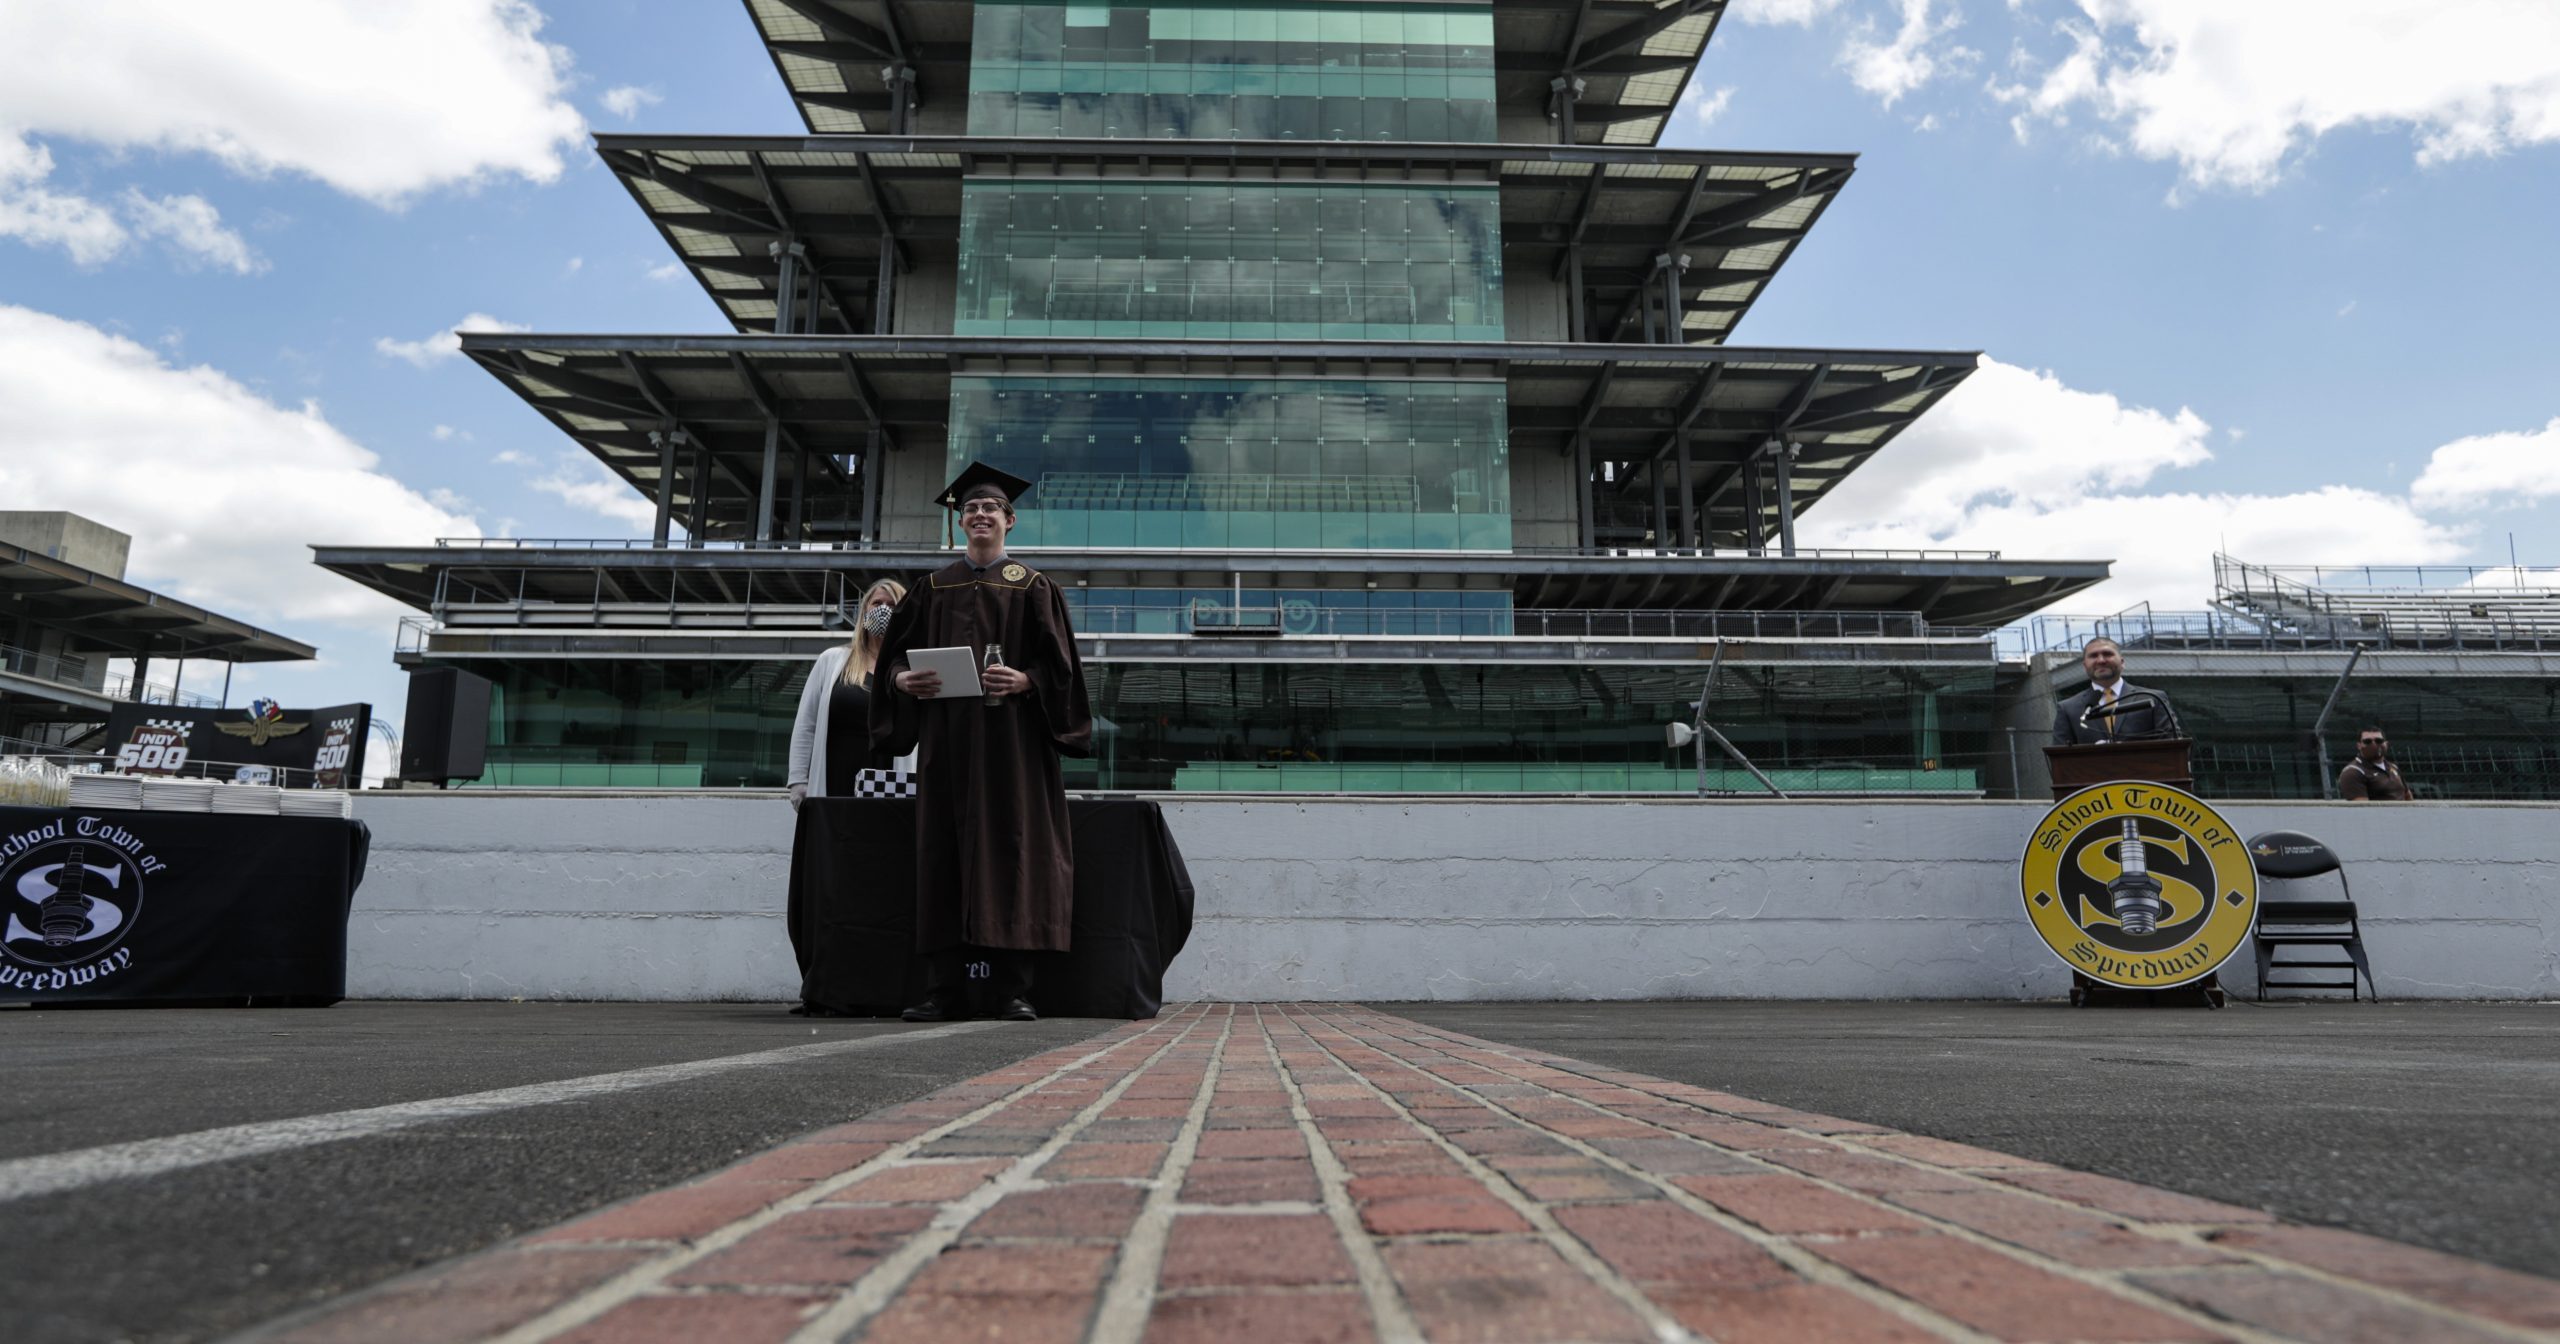 Eli Collins receives his Speedway High School diploma during a ceremony on the start/finish line at the Indianapolis Motor Speedway in Indianapolis on May 30, 2020. The ceremony was held at the track to allow for social distancing requirements due to the coronavirus pandemic.